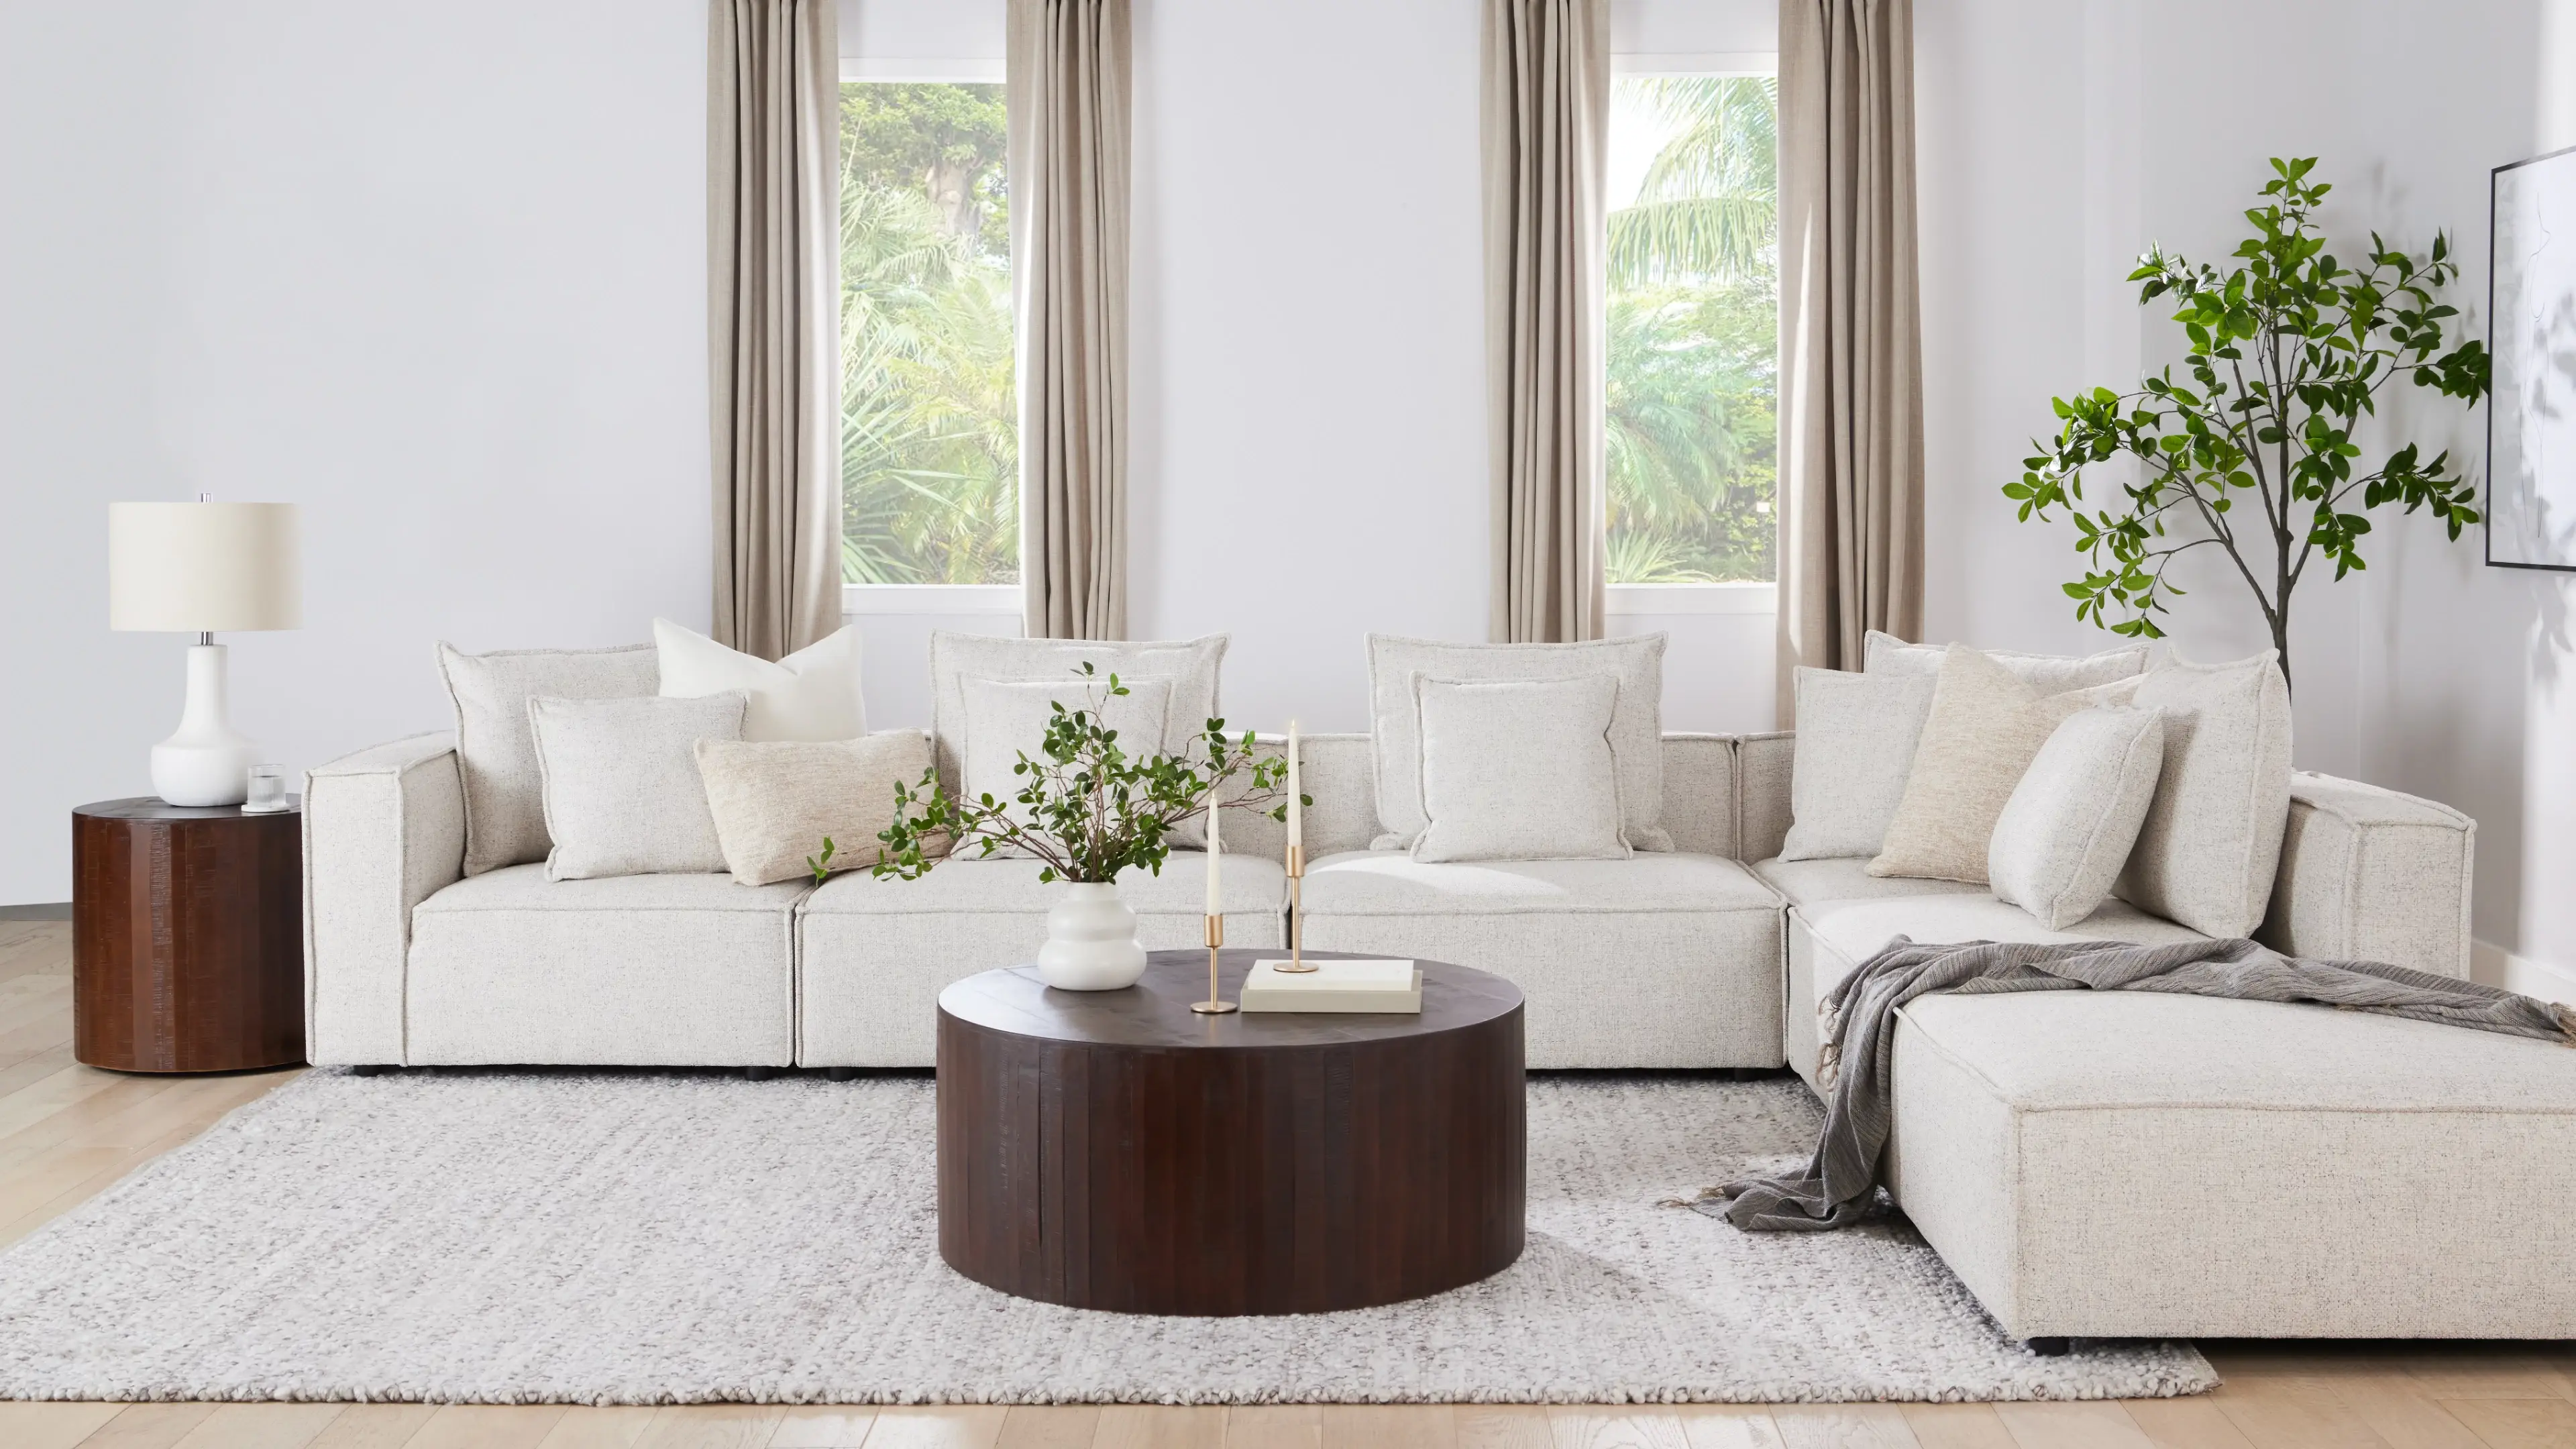 Kick Back and Relax: Finding Your Perfect Sectional Sofa